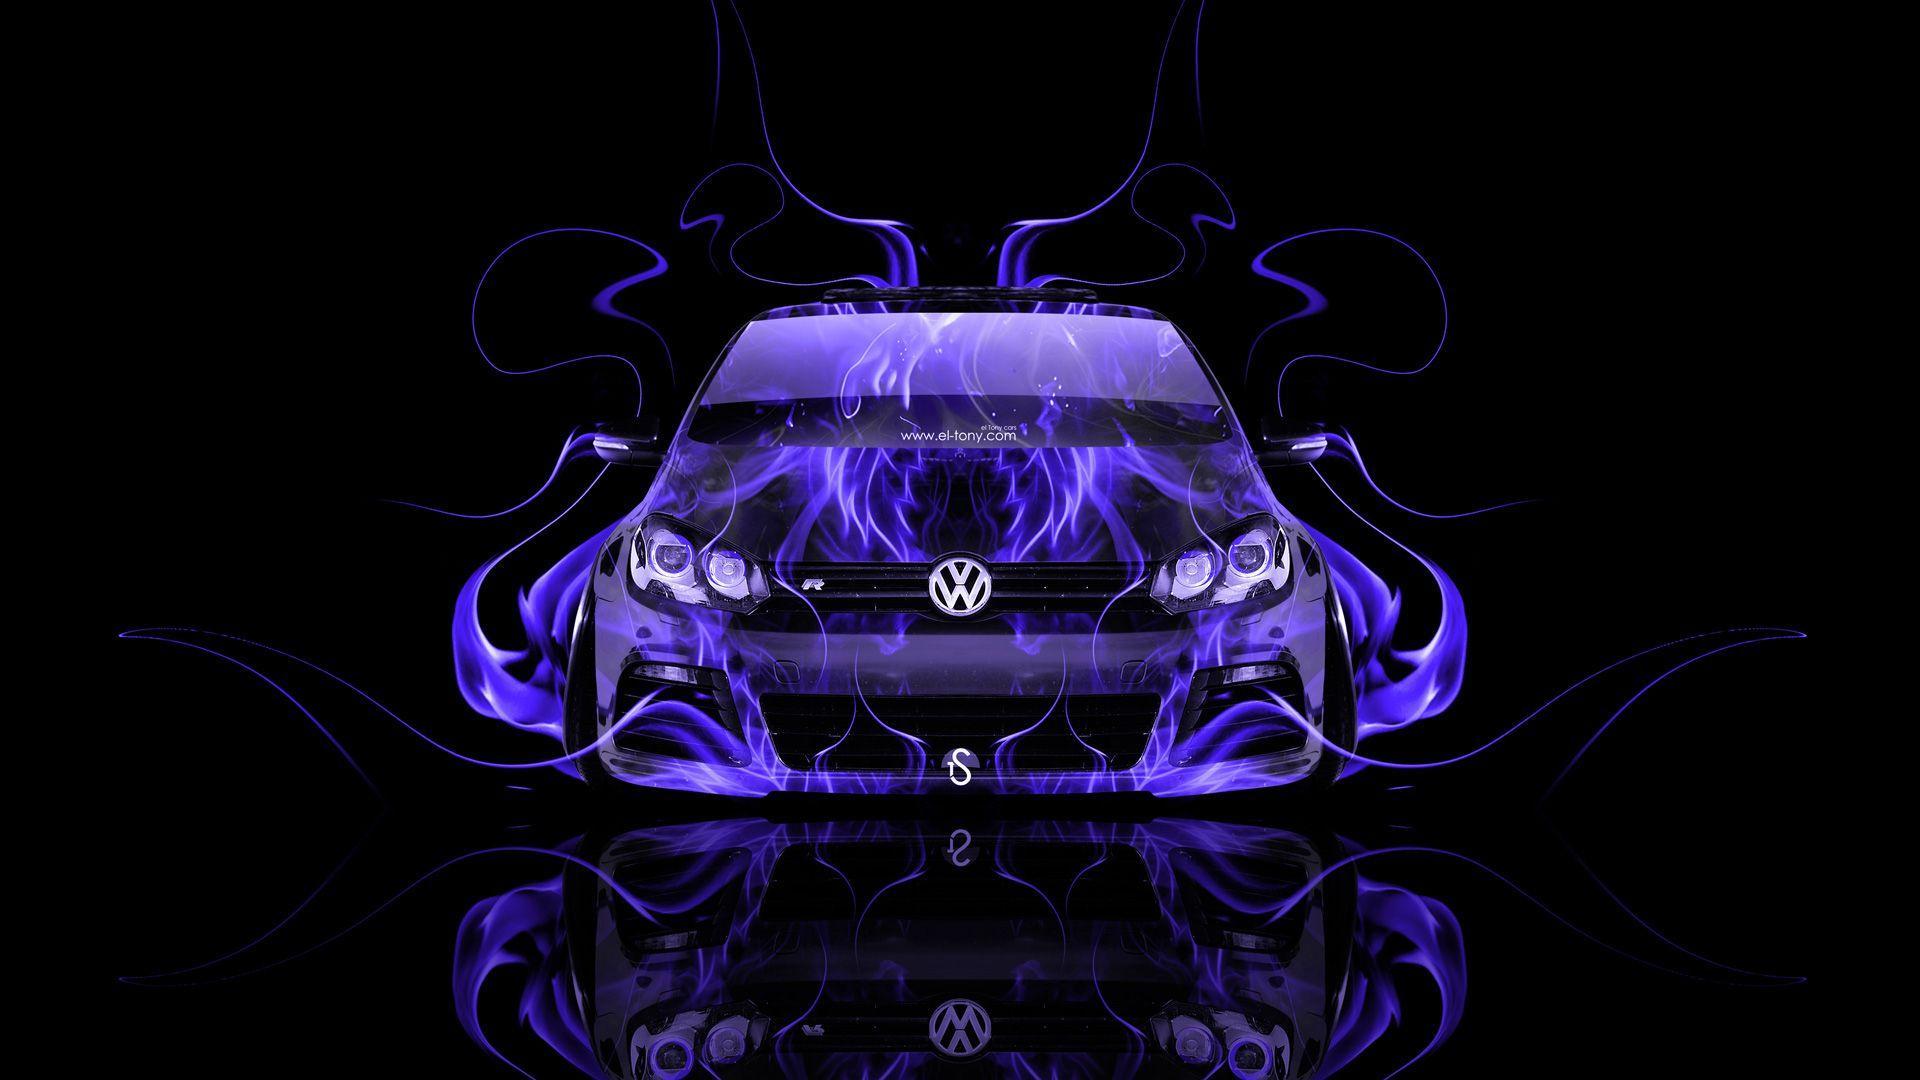 Volkswagen Golf R Front Fire Abstract Car 2014